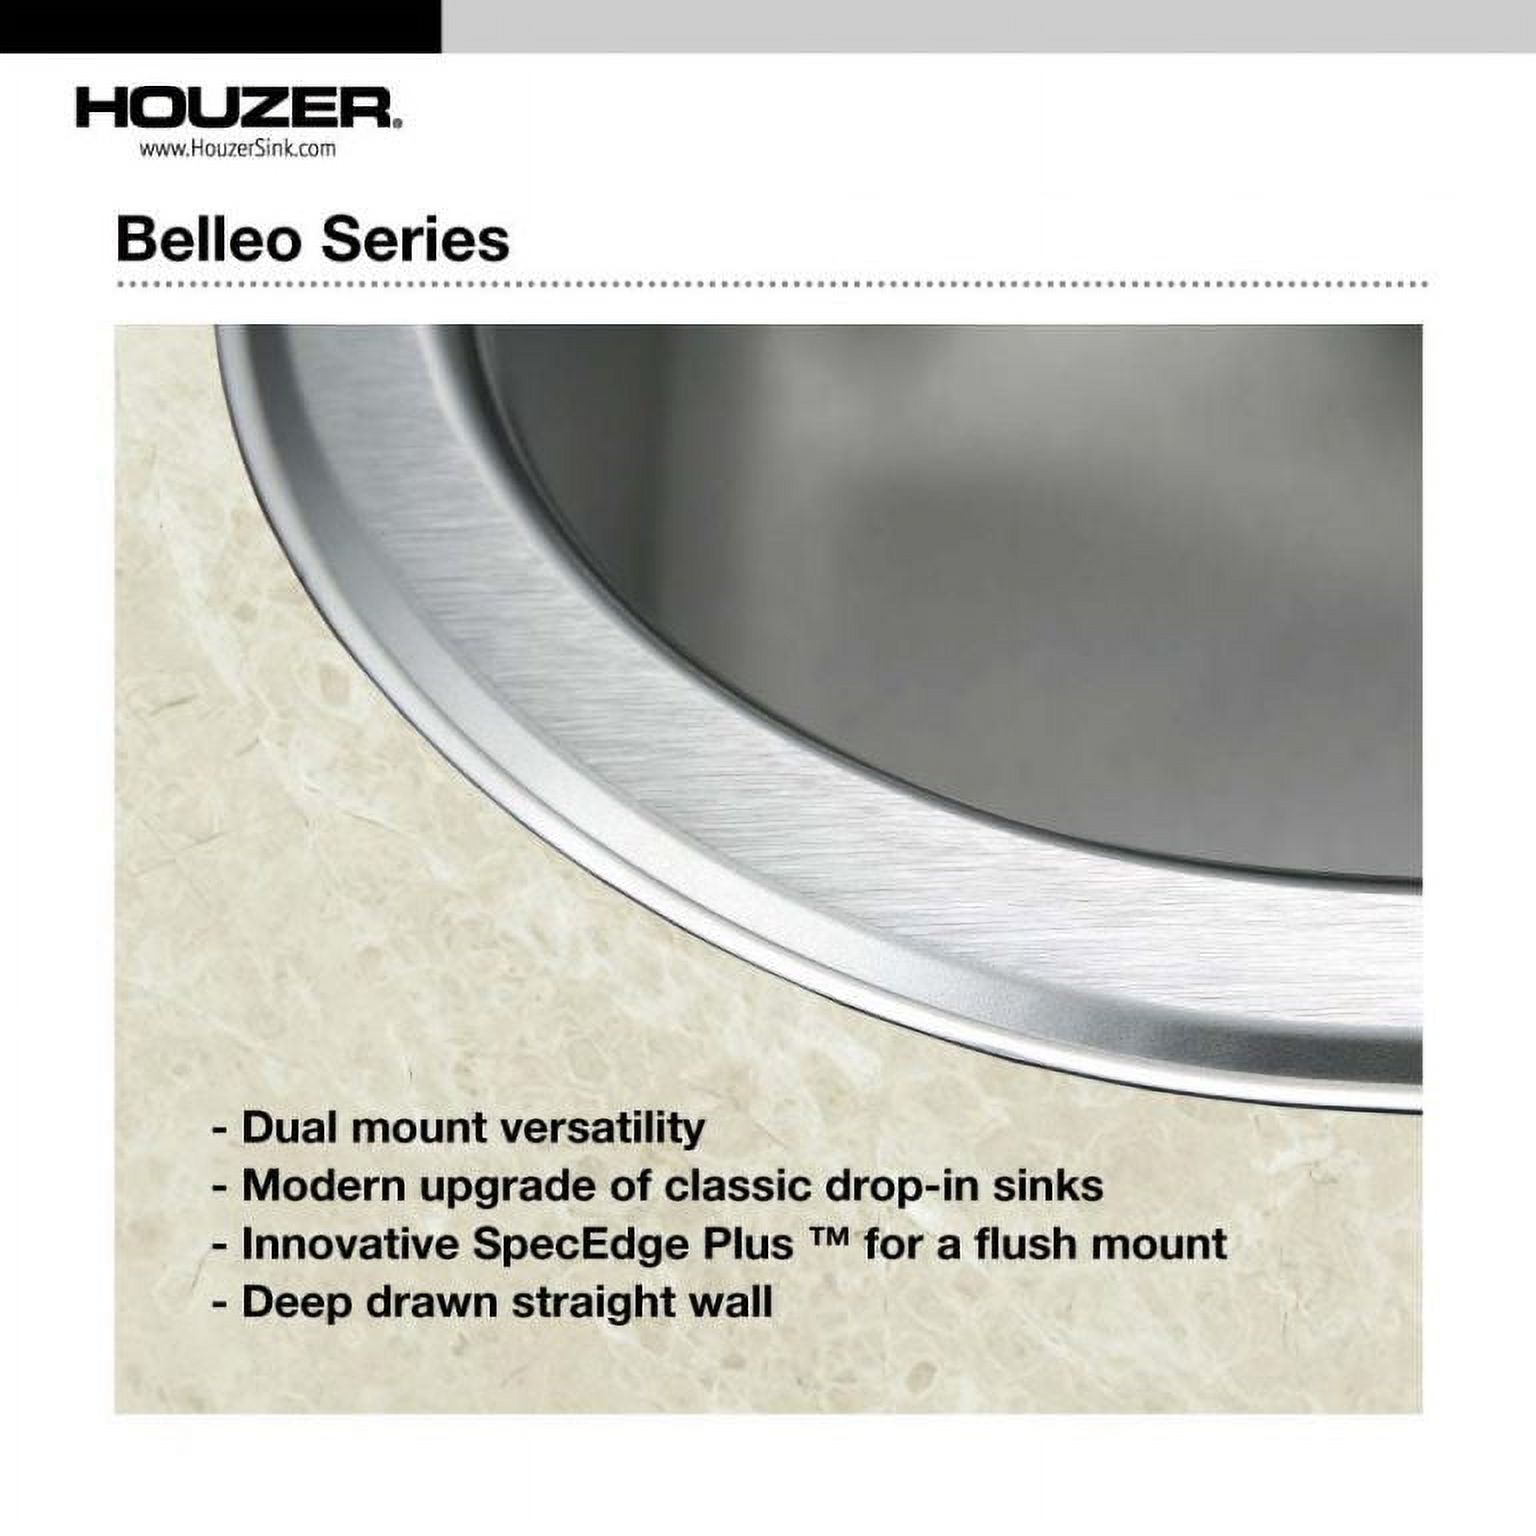 Houzer BSD-3209 31-1/2" x 17-15/16" Stainless Steel Topmount Double Bowl Kitchen Sink - image 5 of 6